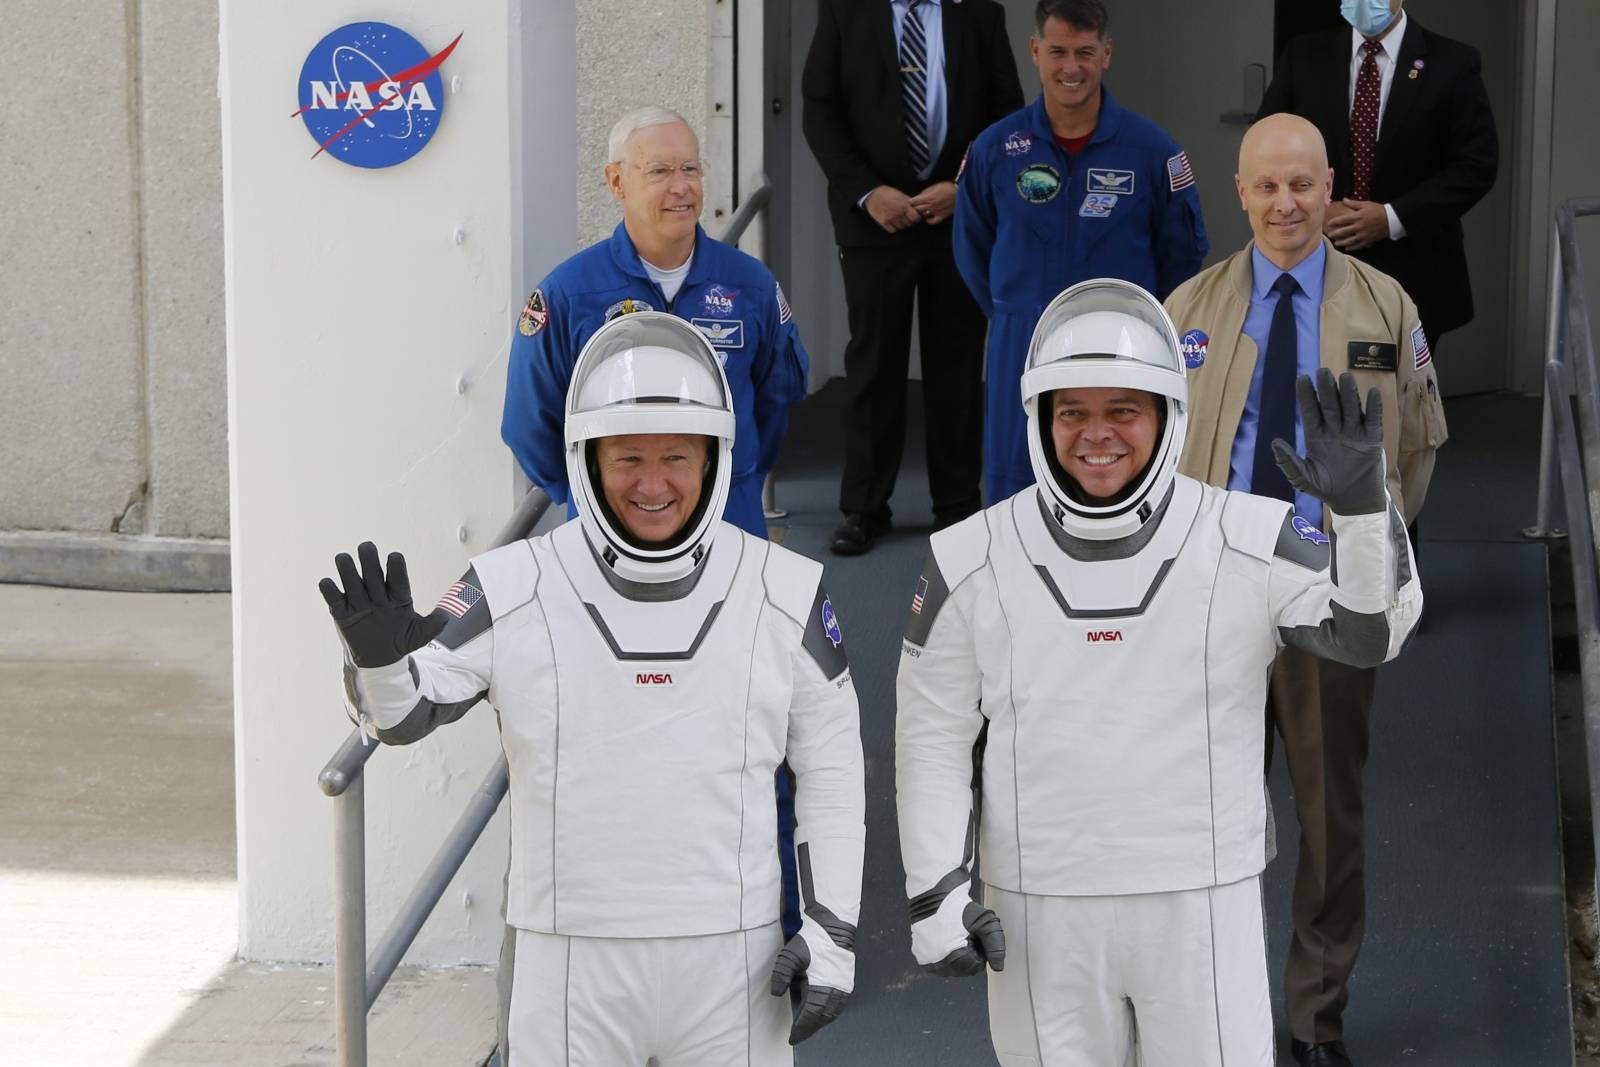 NASA astronauts Douglas Hurley and Robert Behnken wave as they head to Pad39A before the launch of a SpaceX Falcon 9 rocket and Crew Dragon spacecraft at the Kennedy Space Center, in Cape Canaveral